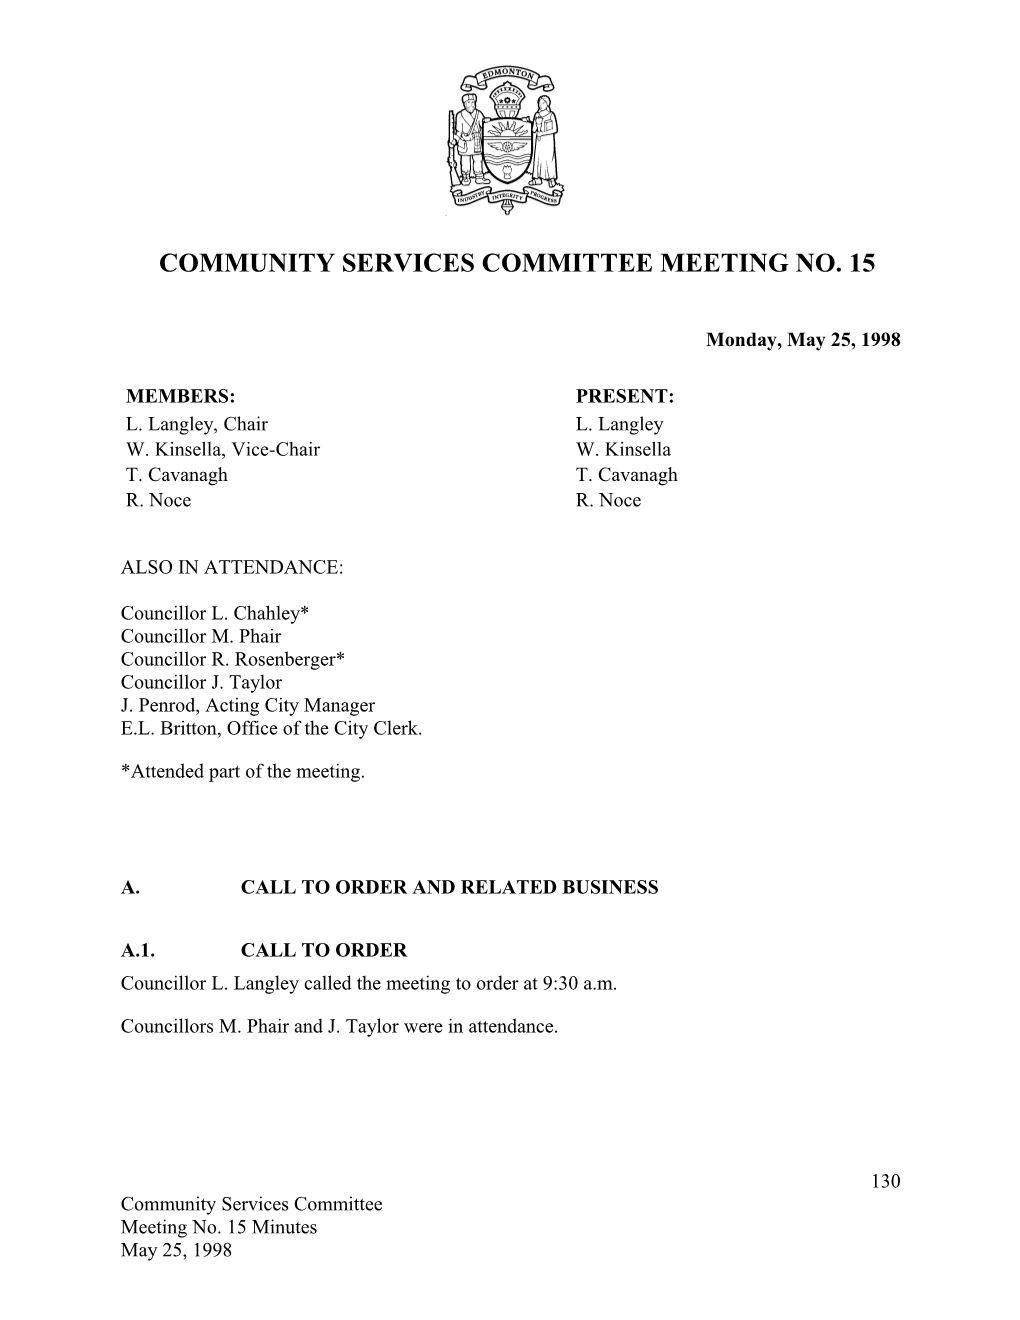 Minutes for Community Services Committee May 25, 1998 Meeting